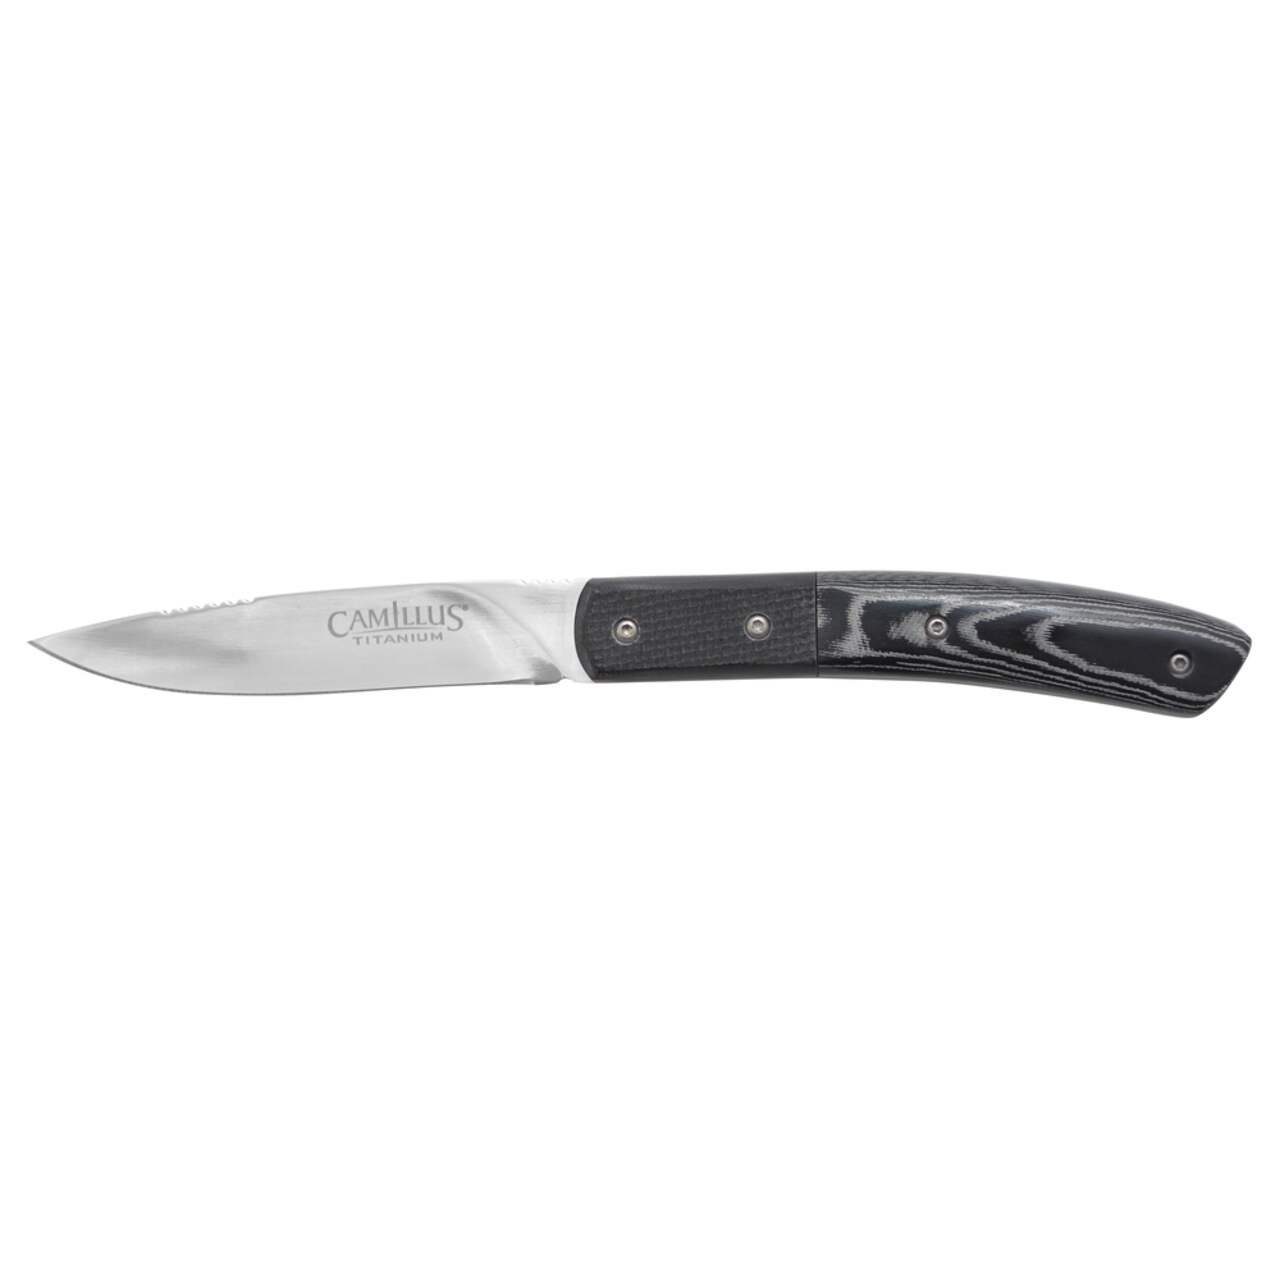 https://media-www.canadiantire.ca/product/playing/hunting/hunting-equipment/3751309/camilius-angler-hunter-fowl-fish-fixed-blade-knife-w-sheath-755aca71-0086-47a7-a490-1233e62a7489.png?imdensity=1&imwidth=640&impolicy=mZoom